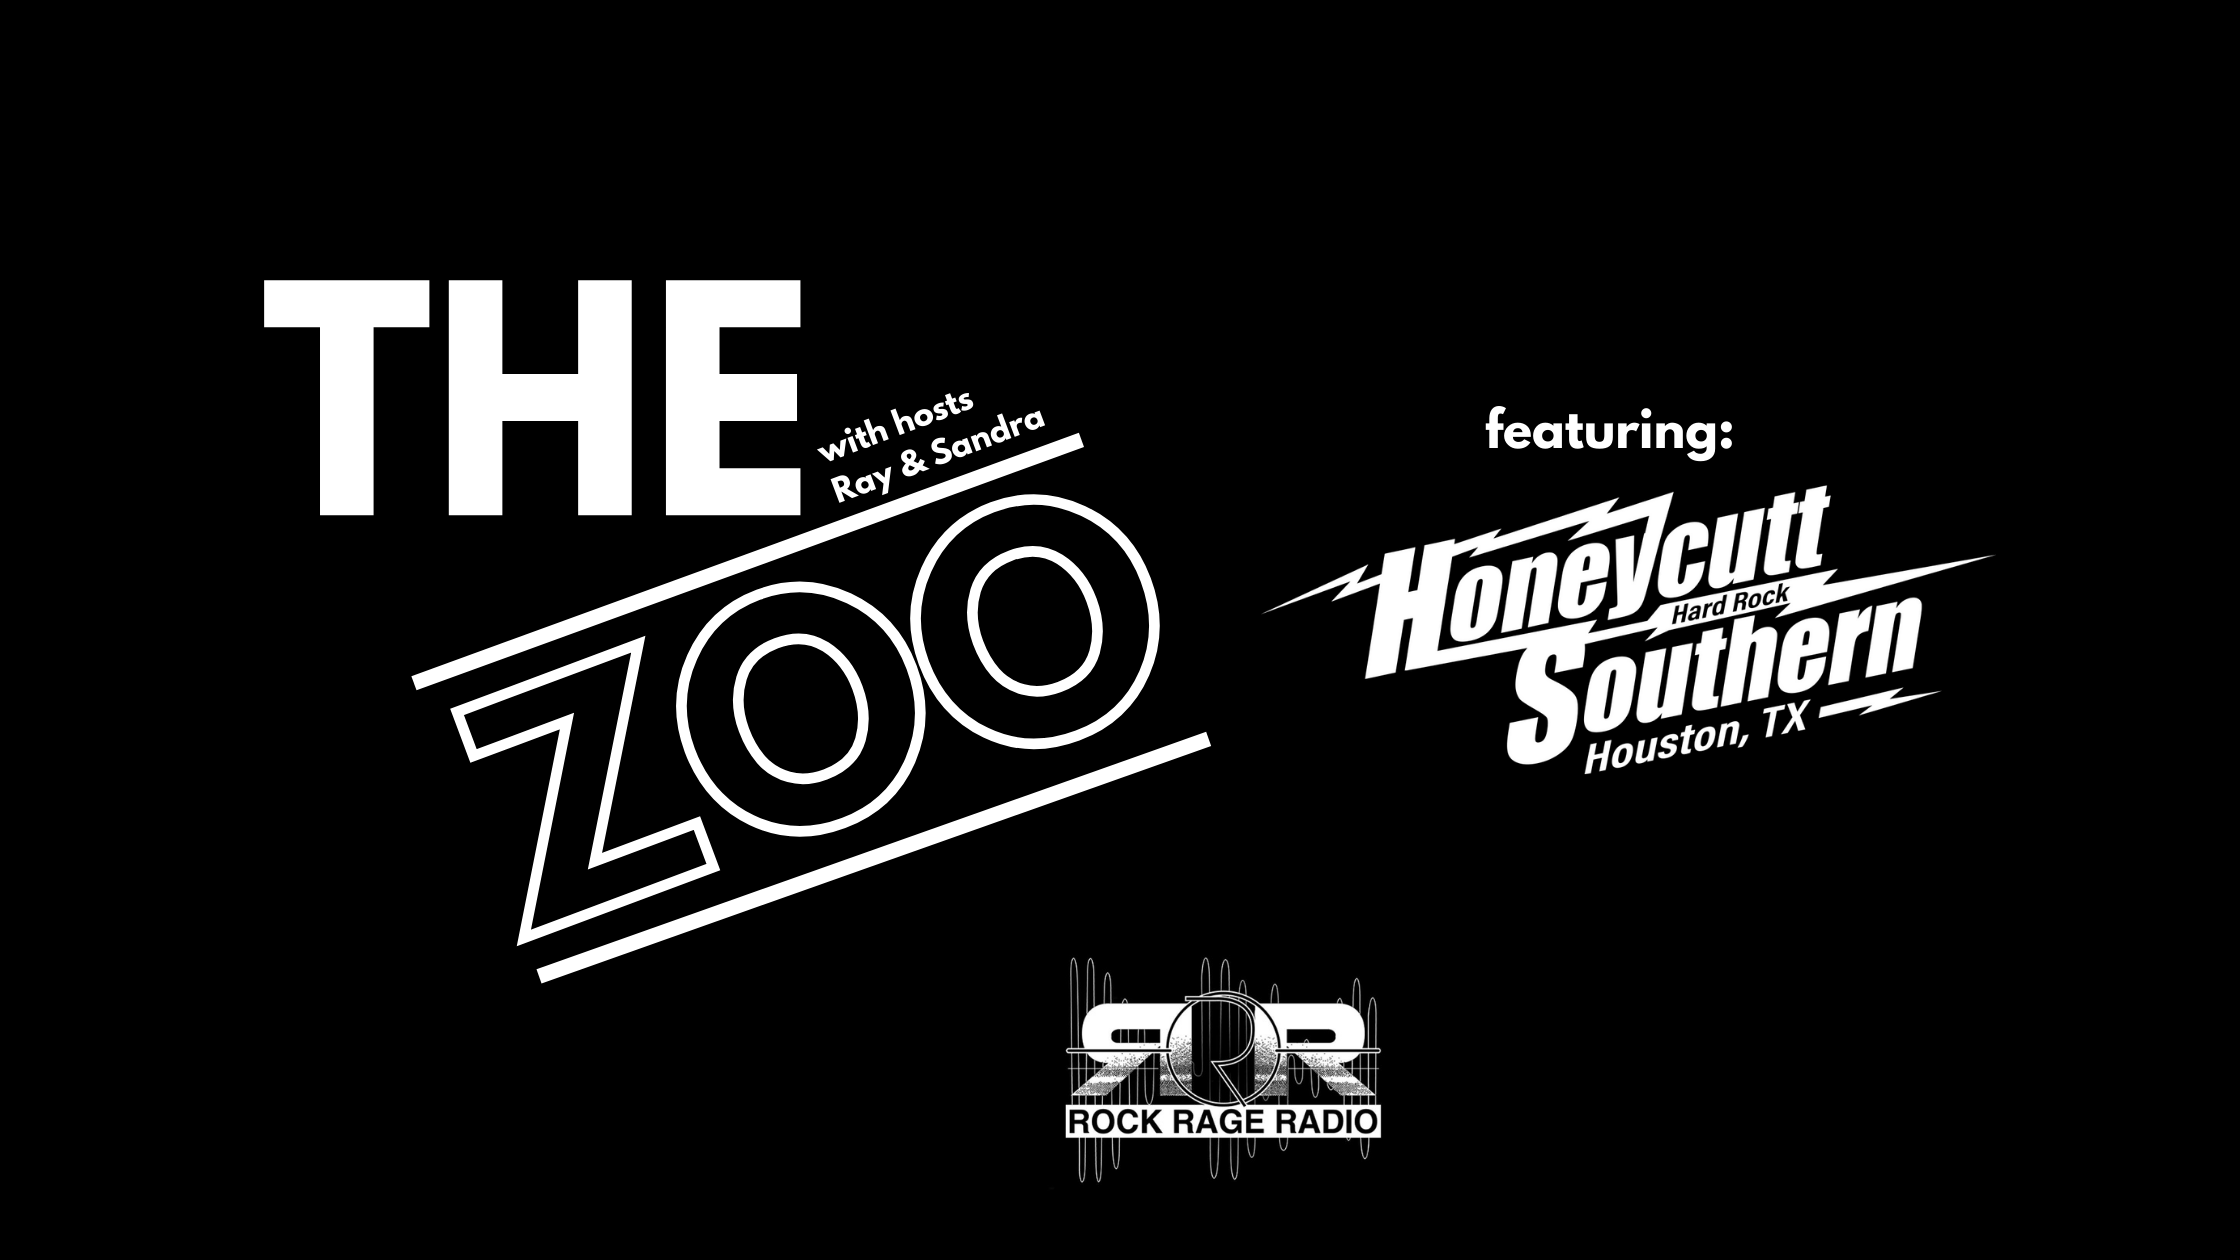 The Zoo Rock Rage Radio featuring Honeycutt Southern